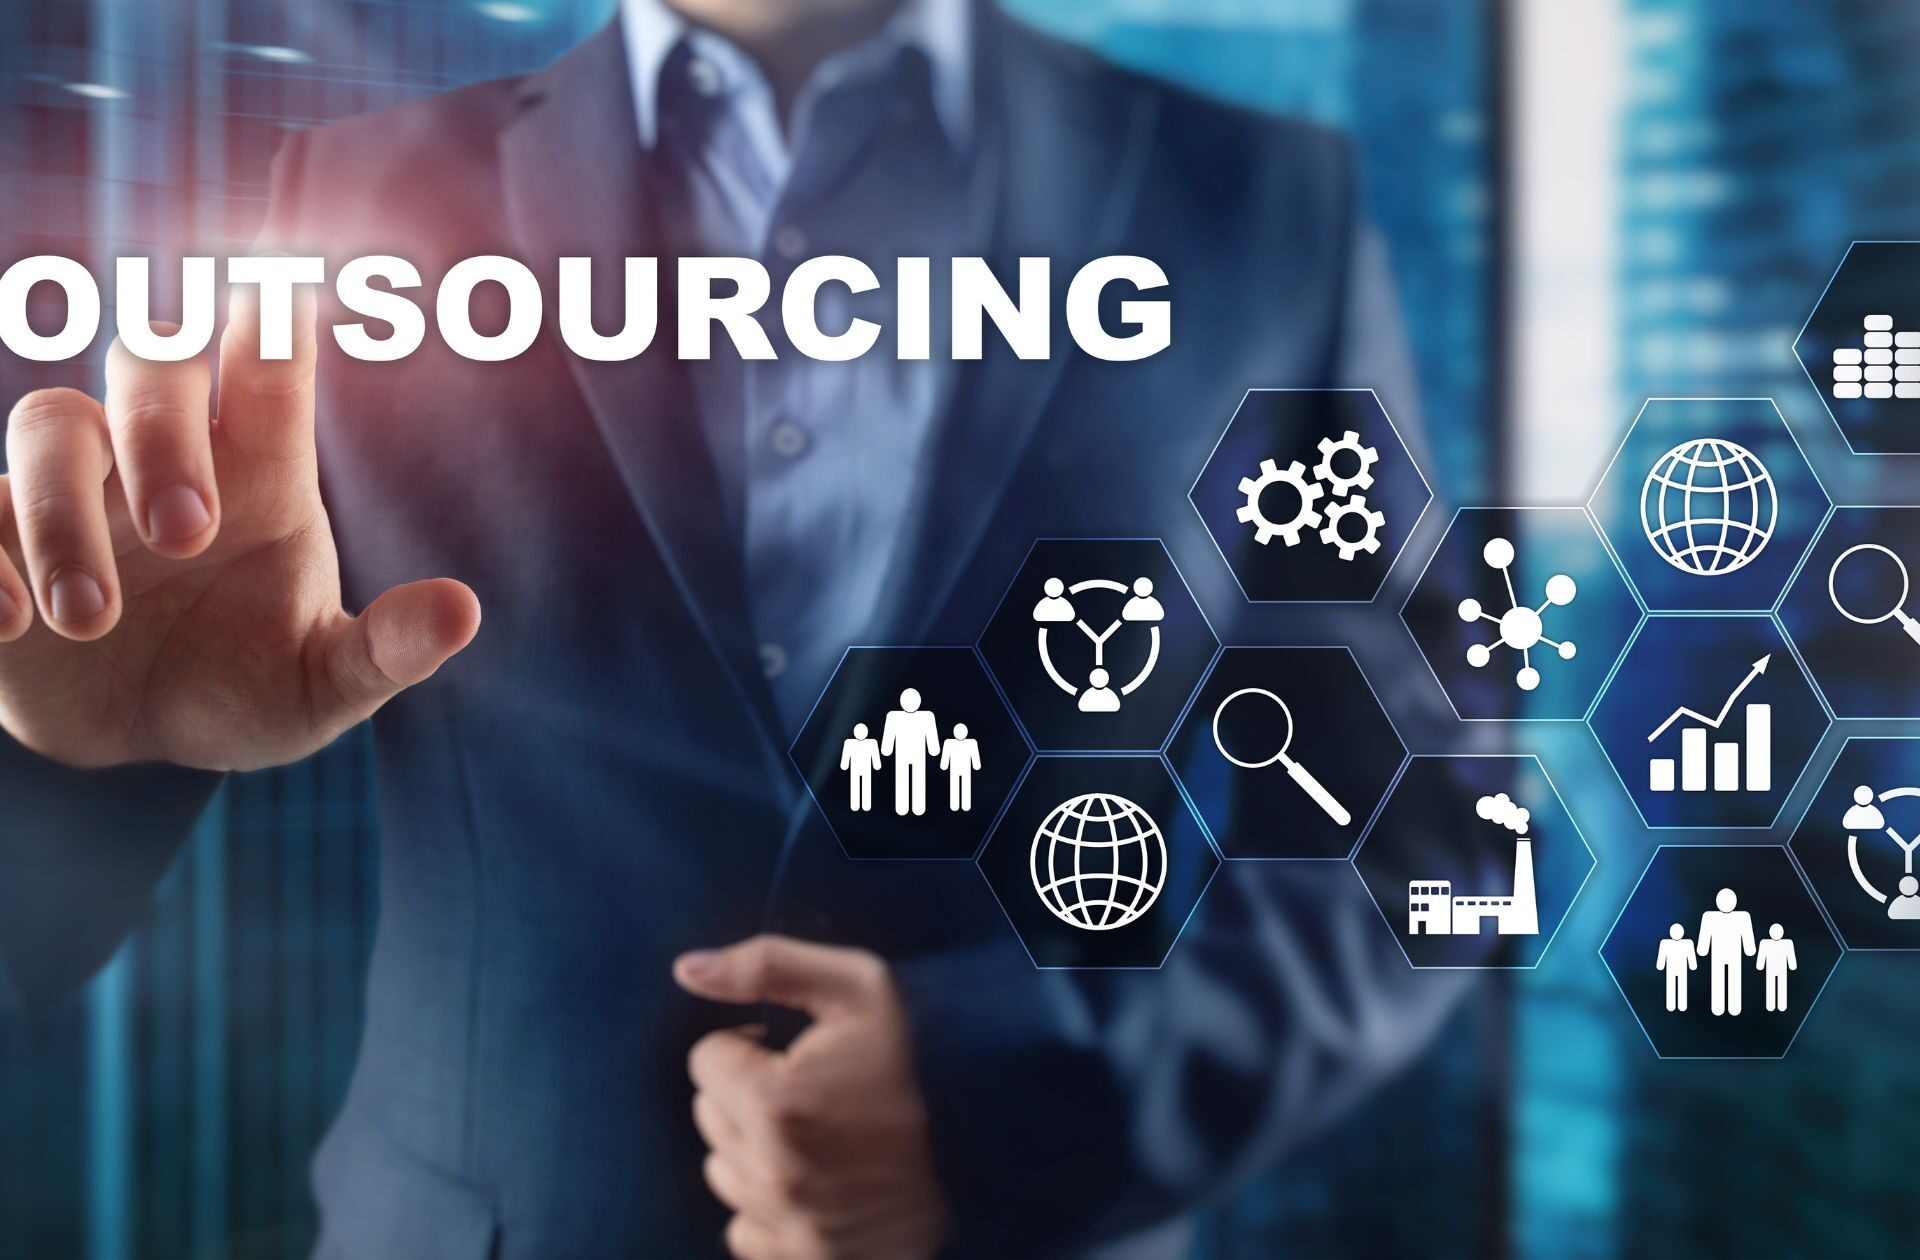 How can small businesses benefit from IT outsourcing?